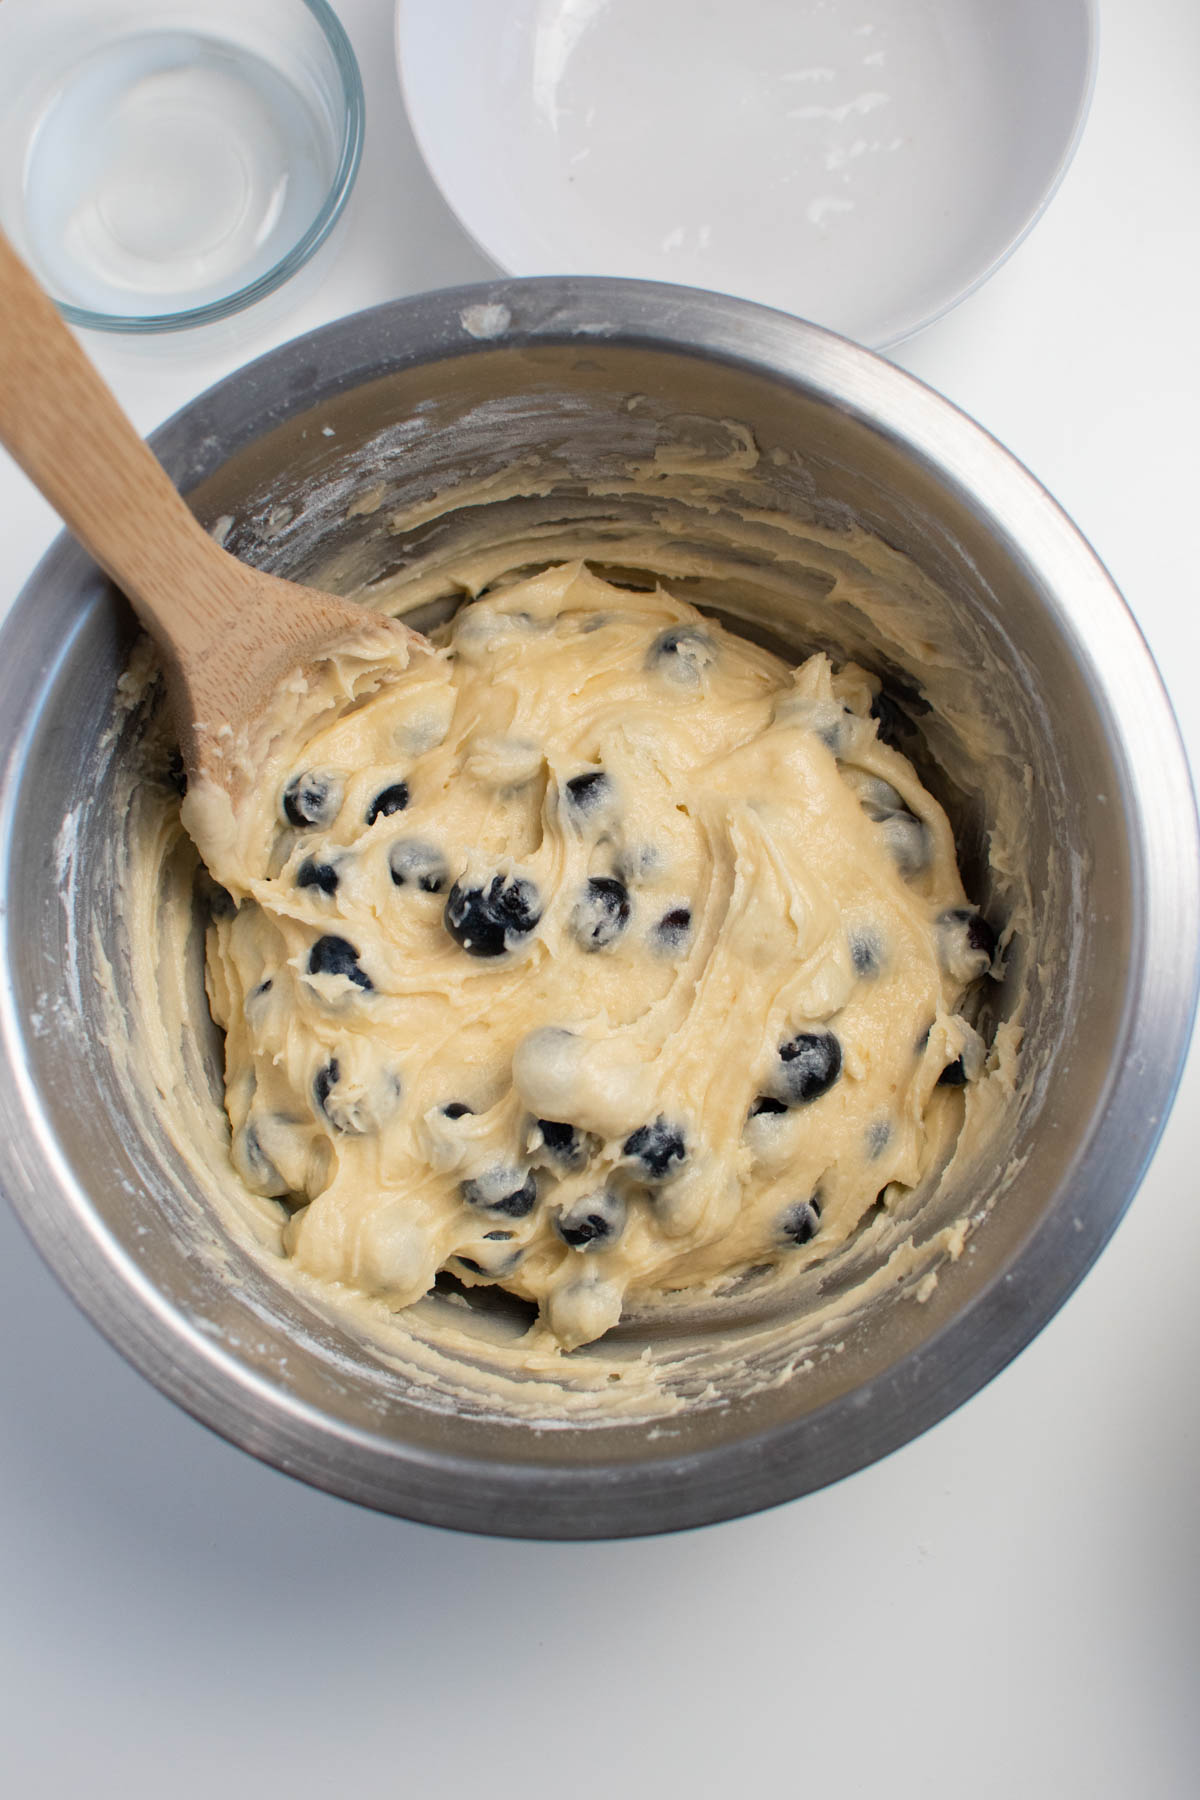 Blueberry muffin batter in metal mixing bowl with wood spoon in batter.